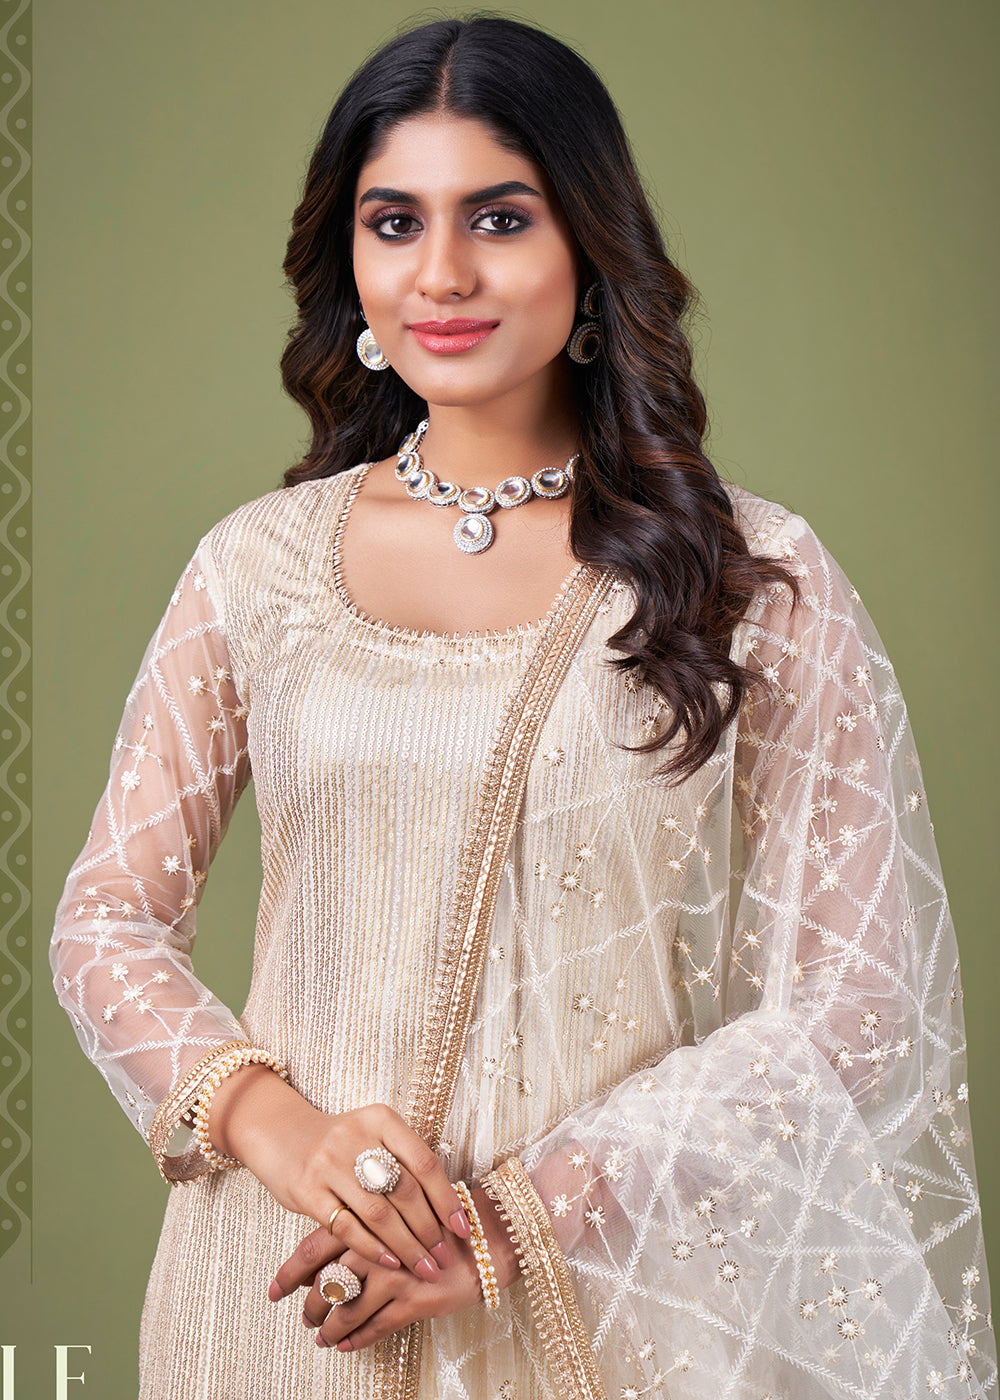 Buy Now Radiant White Cream Tone to Tone Embroidered Salwar Kameez Online in USA, UK, Canada, Germany, Australia & Worldwide at Empress Clothing. 